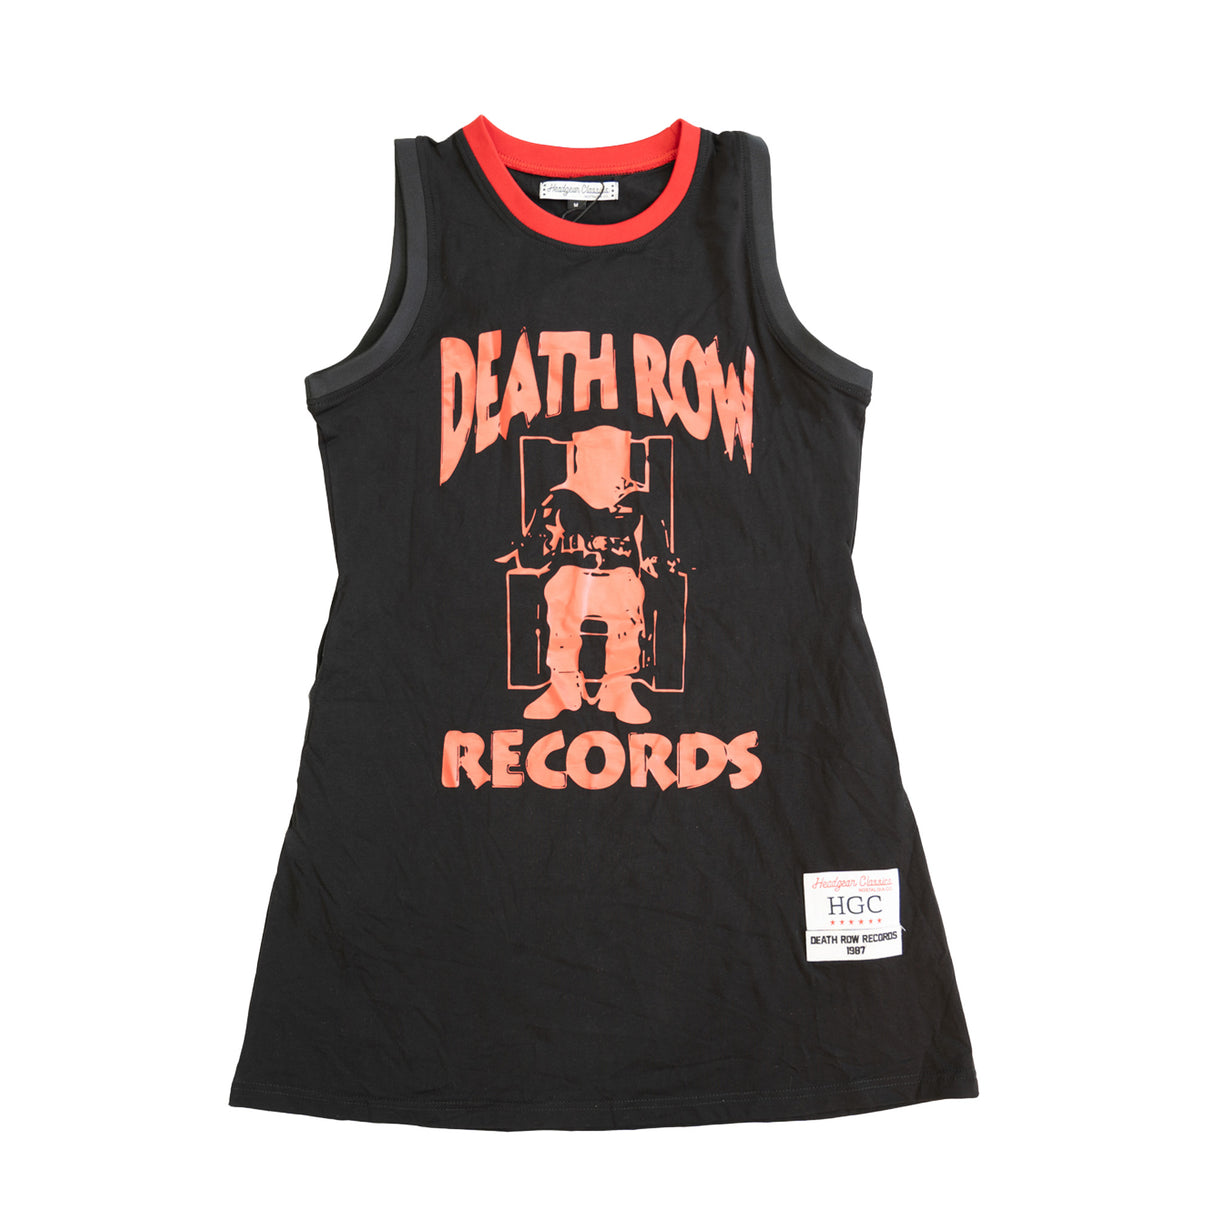 DEATH ROW RECORDS JERSEY DRESS (BLACK/RED)